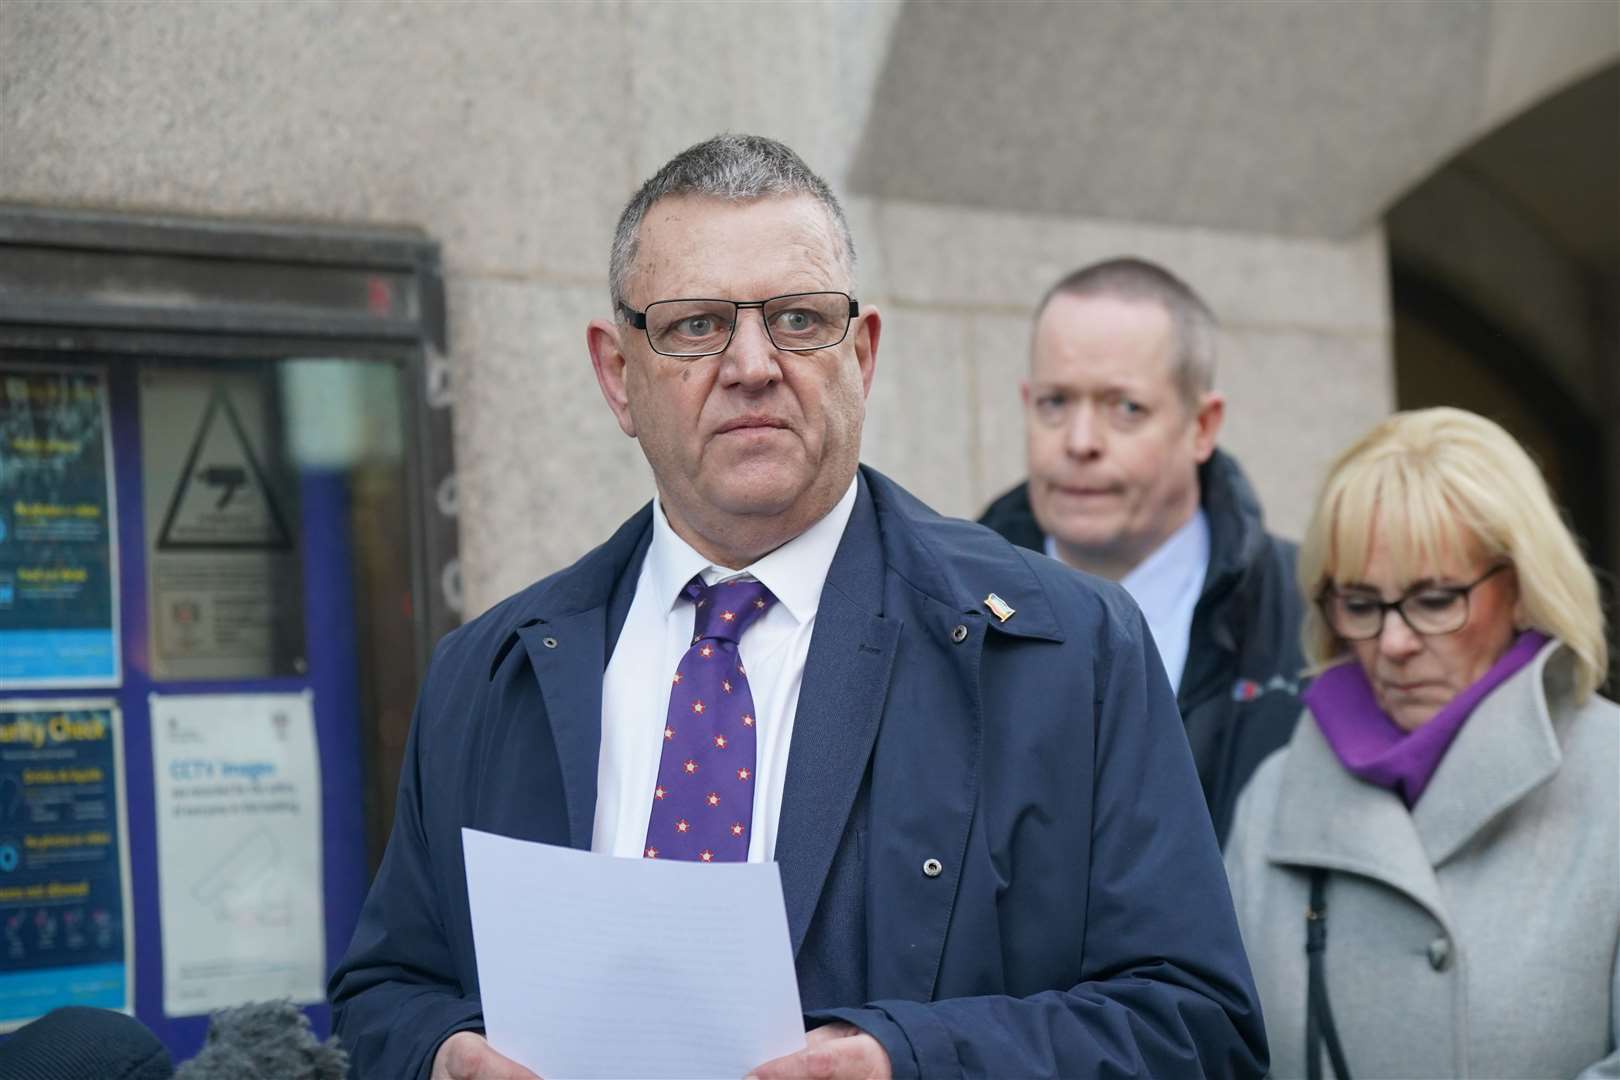 Gary Furlong made a short statement to the media ahead of the inquest (Yui Mok/PA)